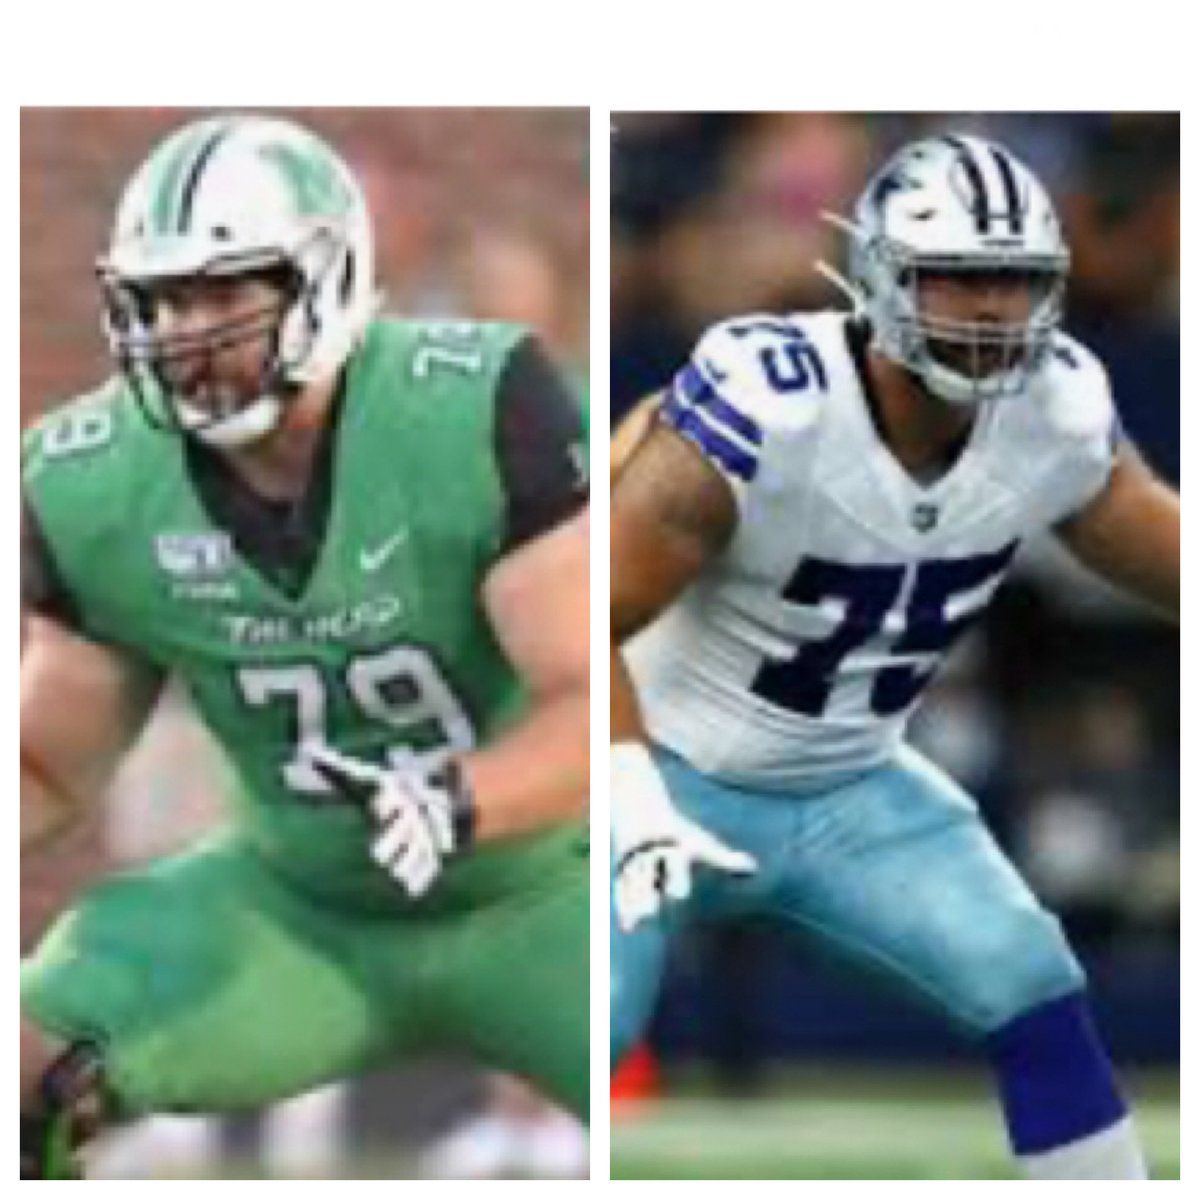 Wishing @HerdFB alum @JoshBall75 and @dallascowboys the very best of luck, as the @NFL playoffs begin this weekend. #HerdFamily #OneHerd #HerdBrotherhood